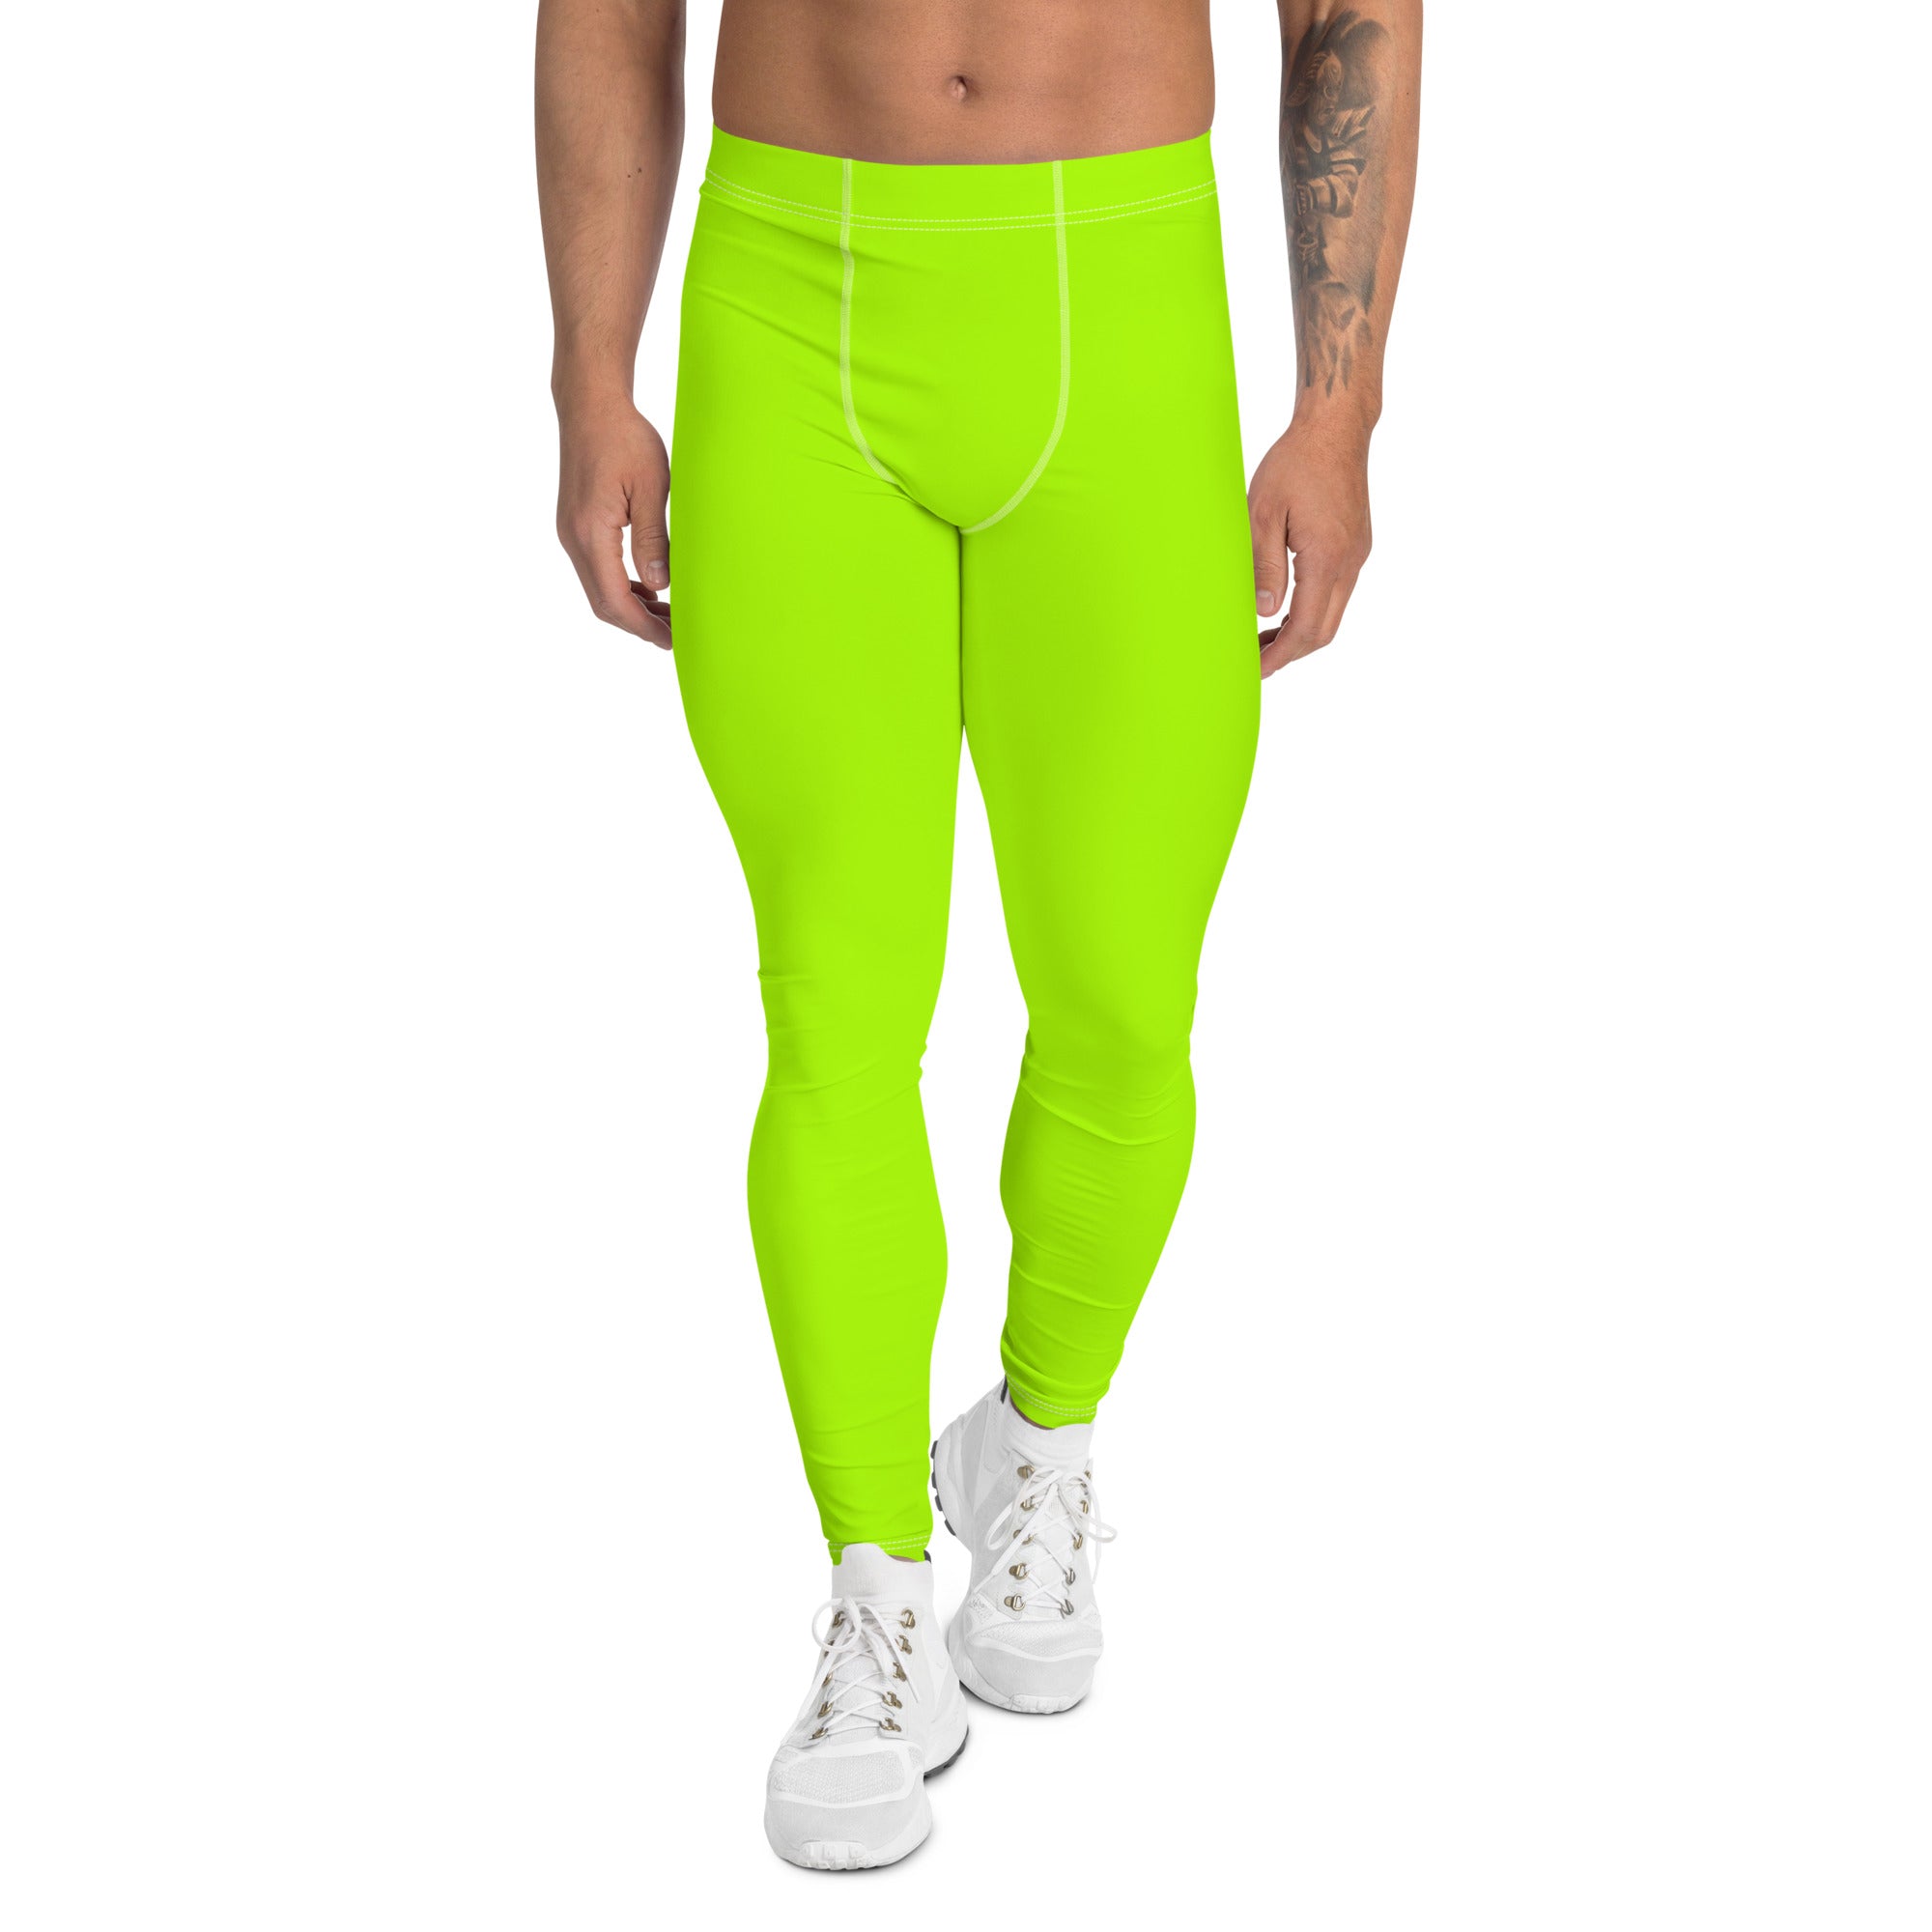 Neon Green Best Men's Leggings, Solid Bright Green Best Modern Sexy Meggings Men's Workout Gym Sports Running Tights Leggings, Men's Compression Tights Pants - Made in USA/ EU/MX (US Size: XS-3XL)